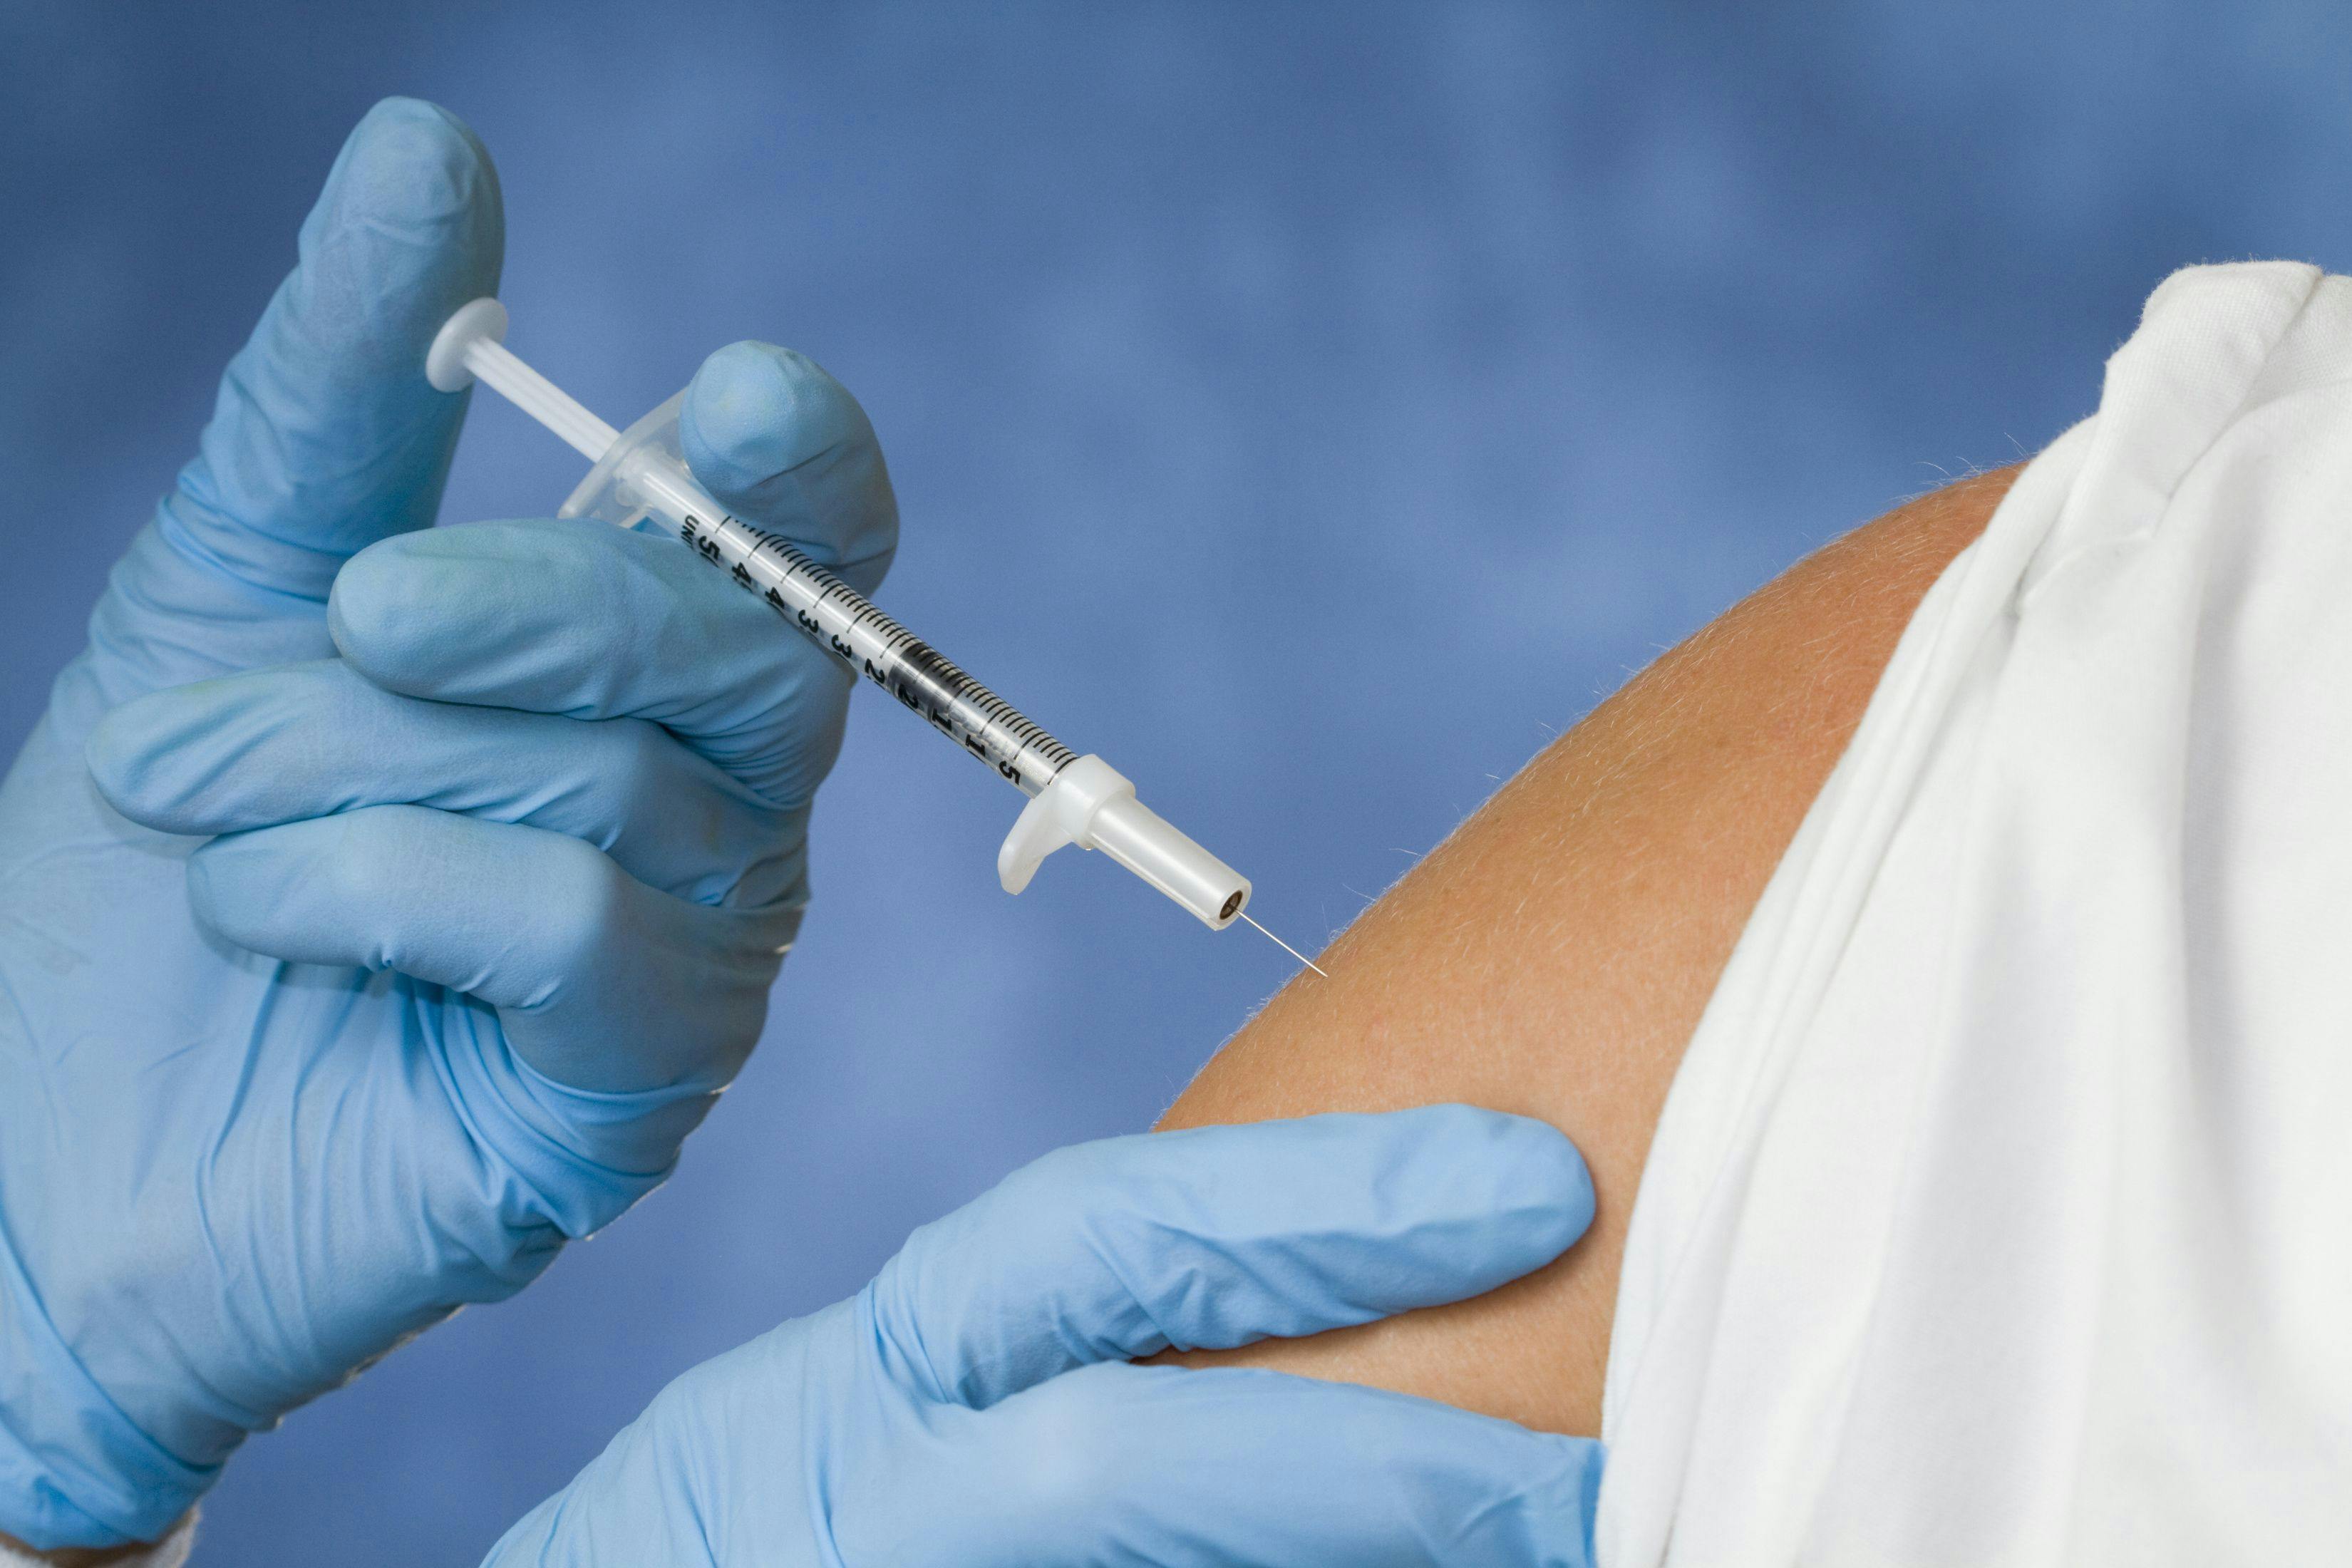 CDC Updates ACIP Guidance, Recommending Specific Flu Vaccines for Patients 65 and Older